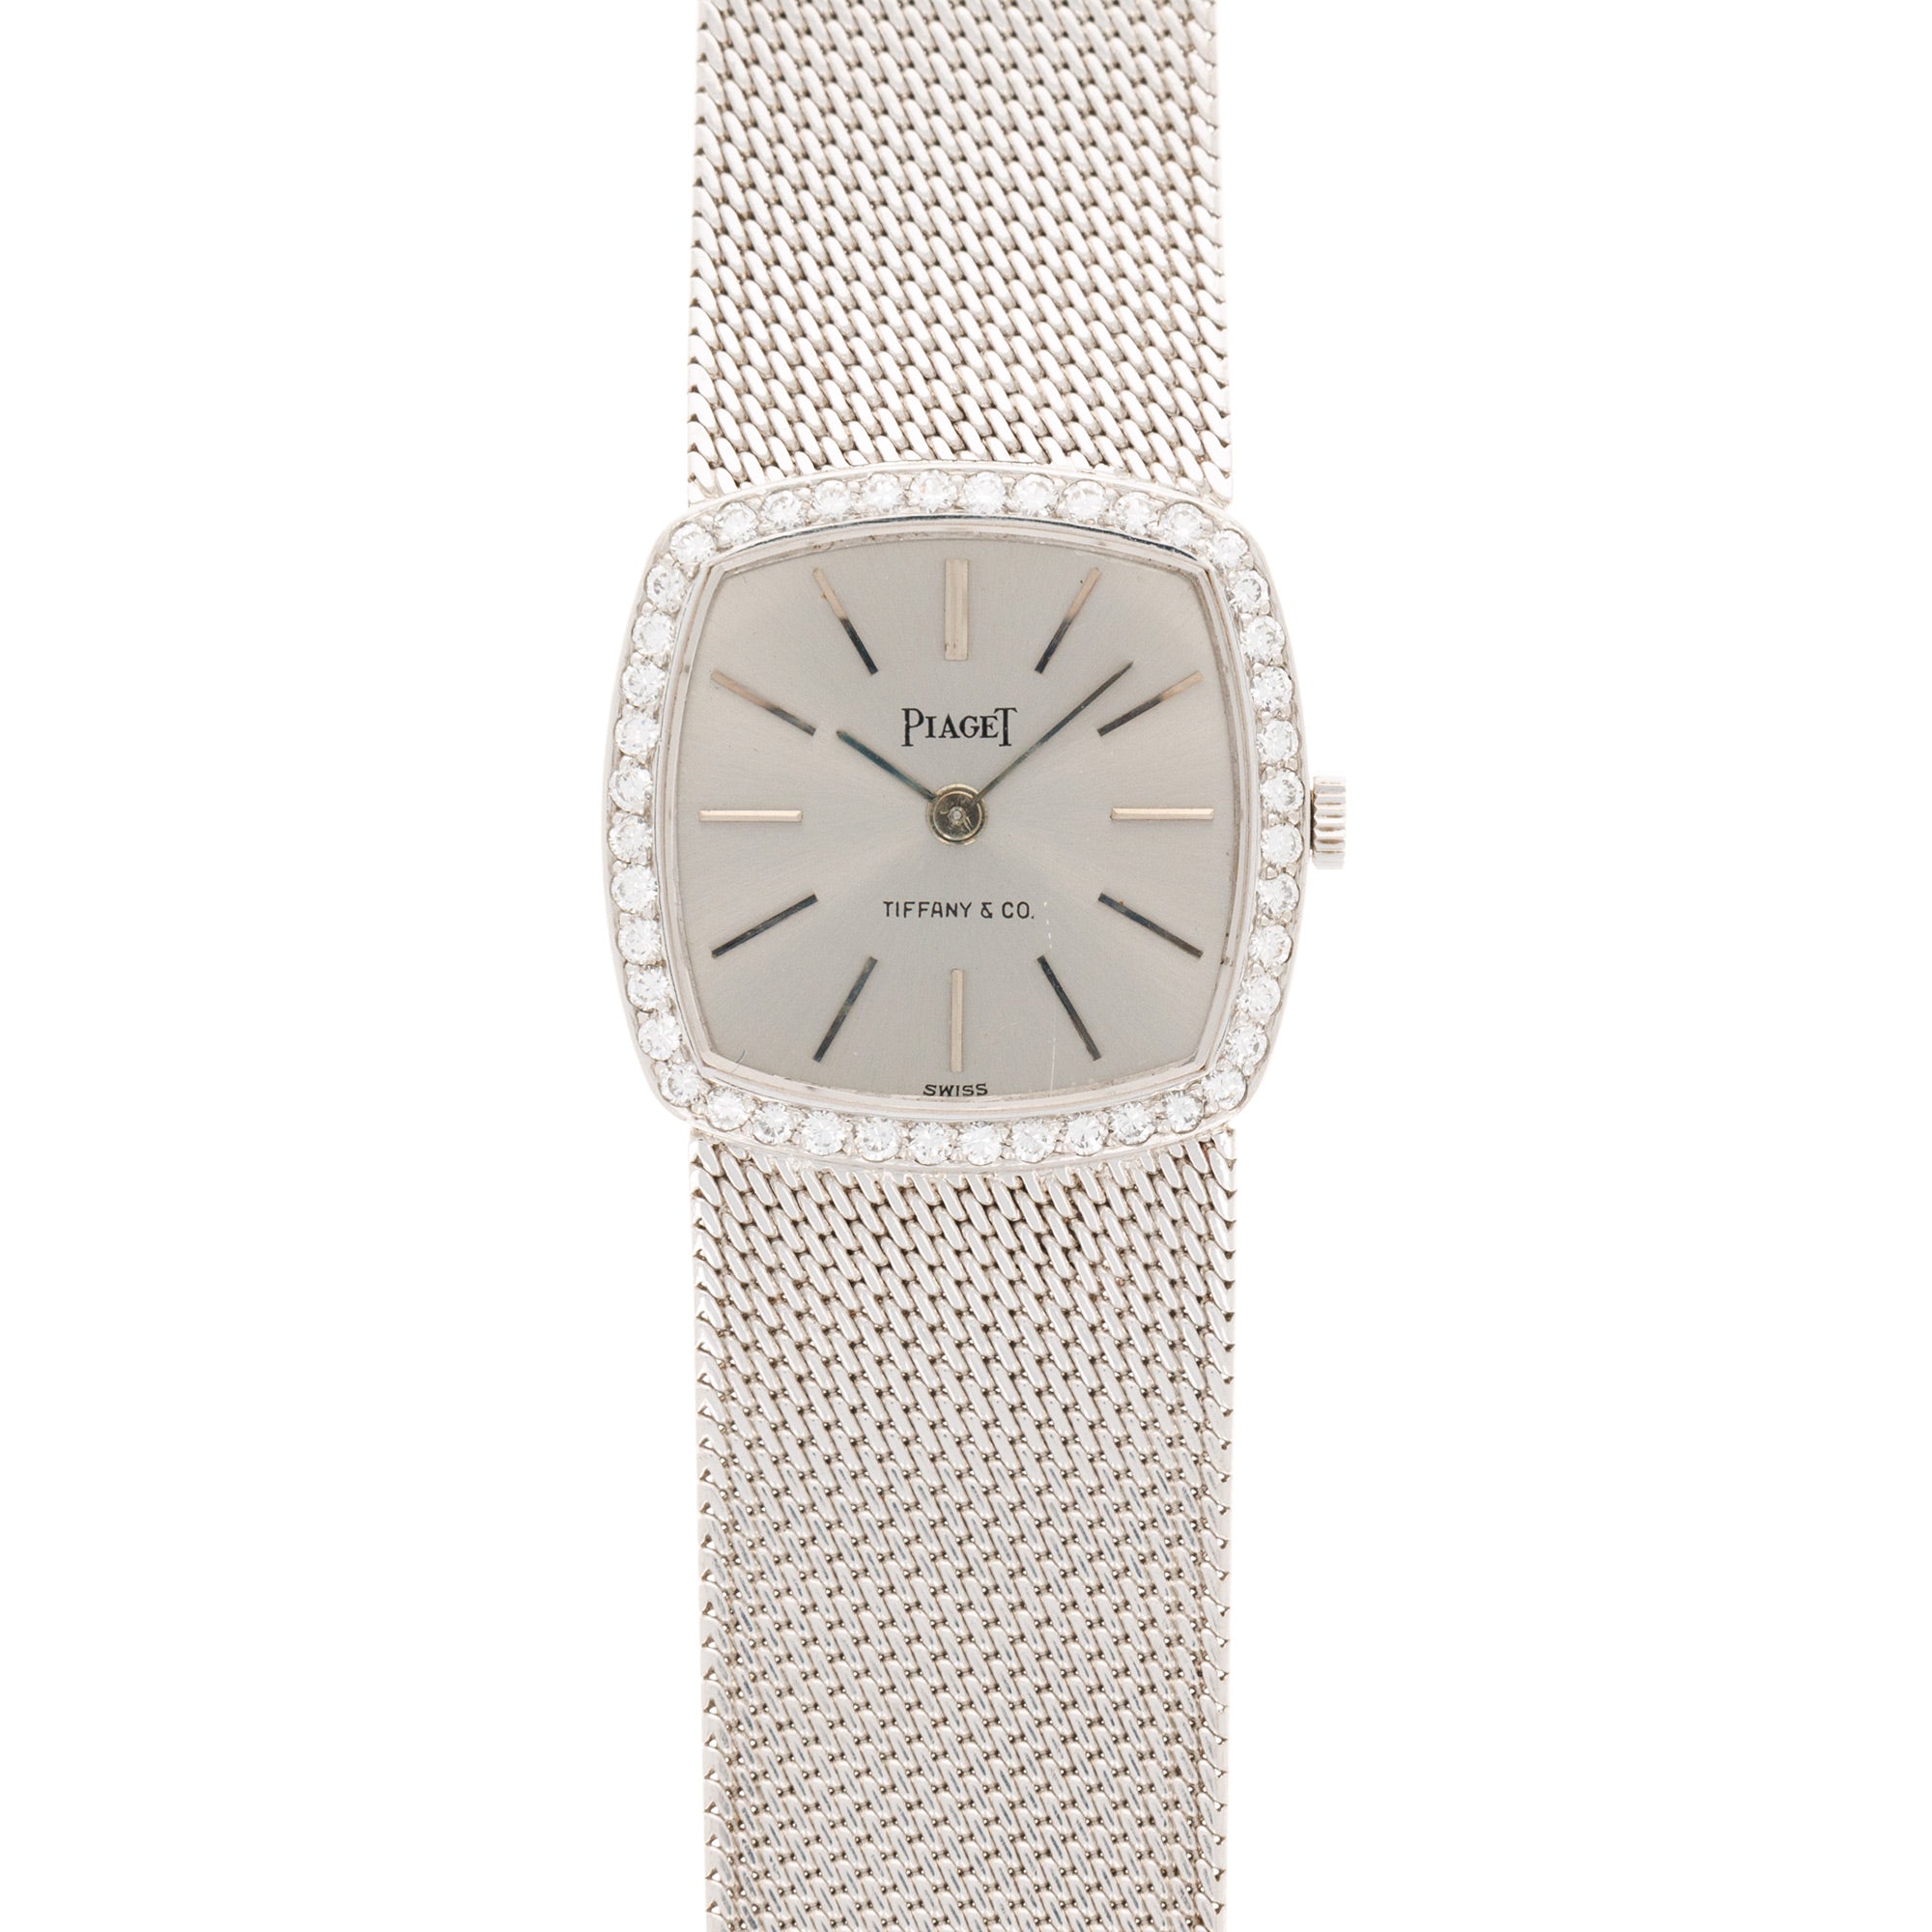 Piaget - Piaget White Gold Diamond Watch, Retailed by Tiffany &amp; Co. - The Keystone Watches